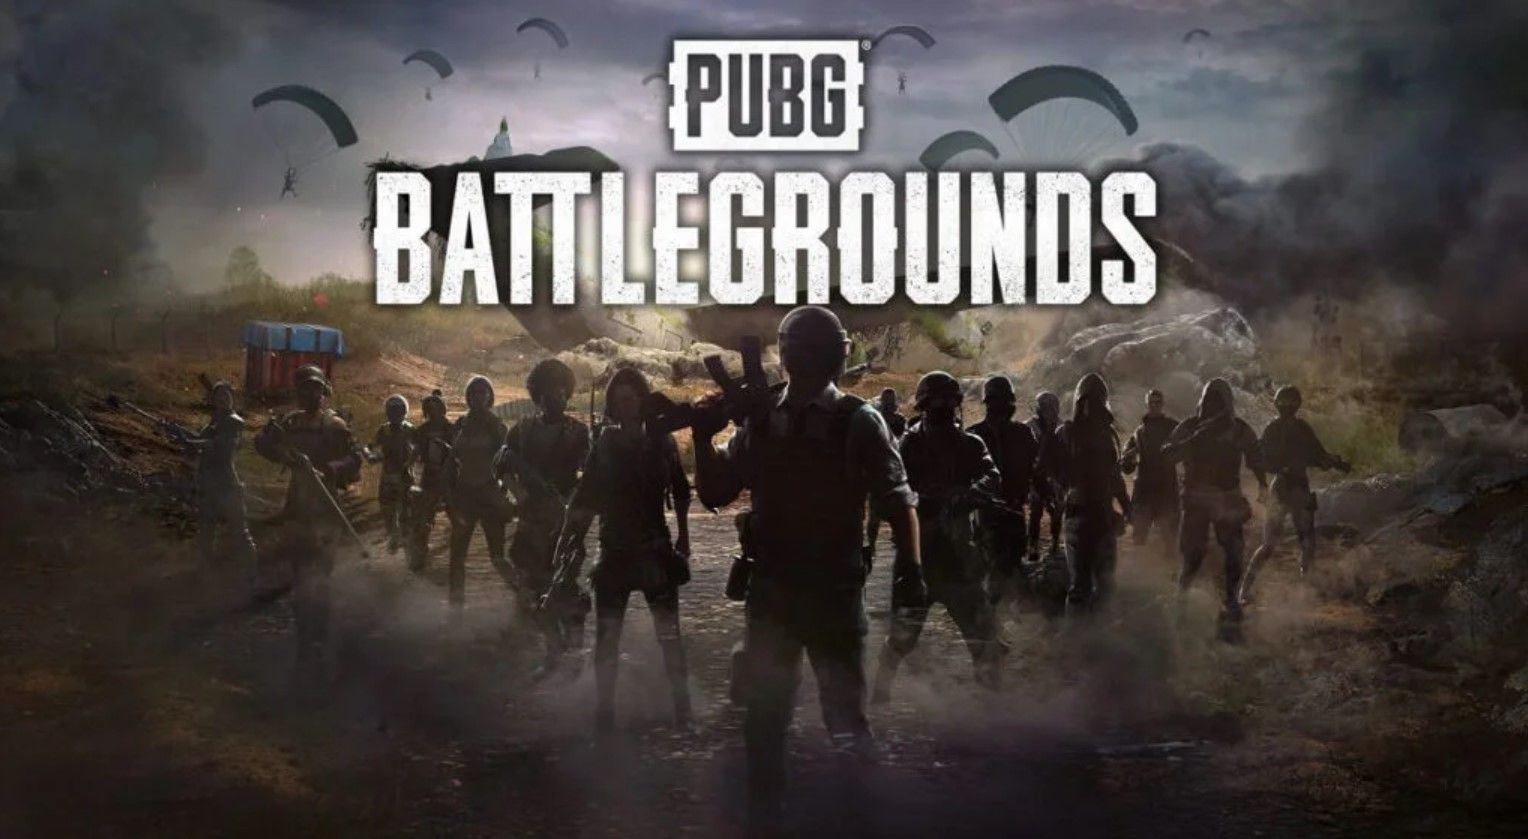 Most famous pubg cheat these days aka Sharpshooter. I know 2-3 cheaters who  have been using this for 1year without even getting banned once. They have  made this channel on infamous telegram